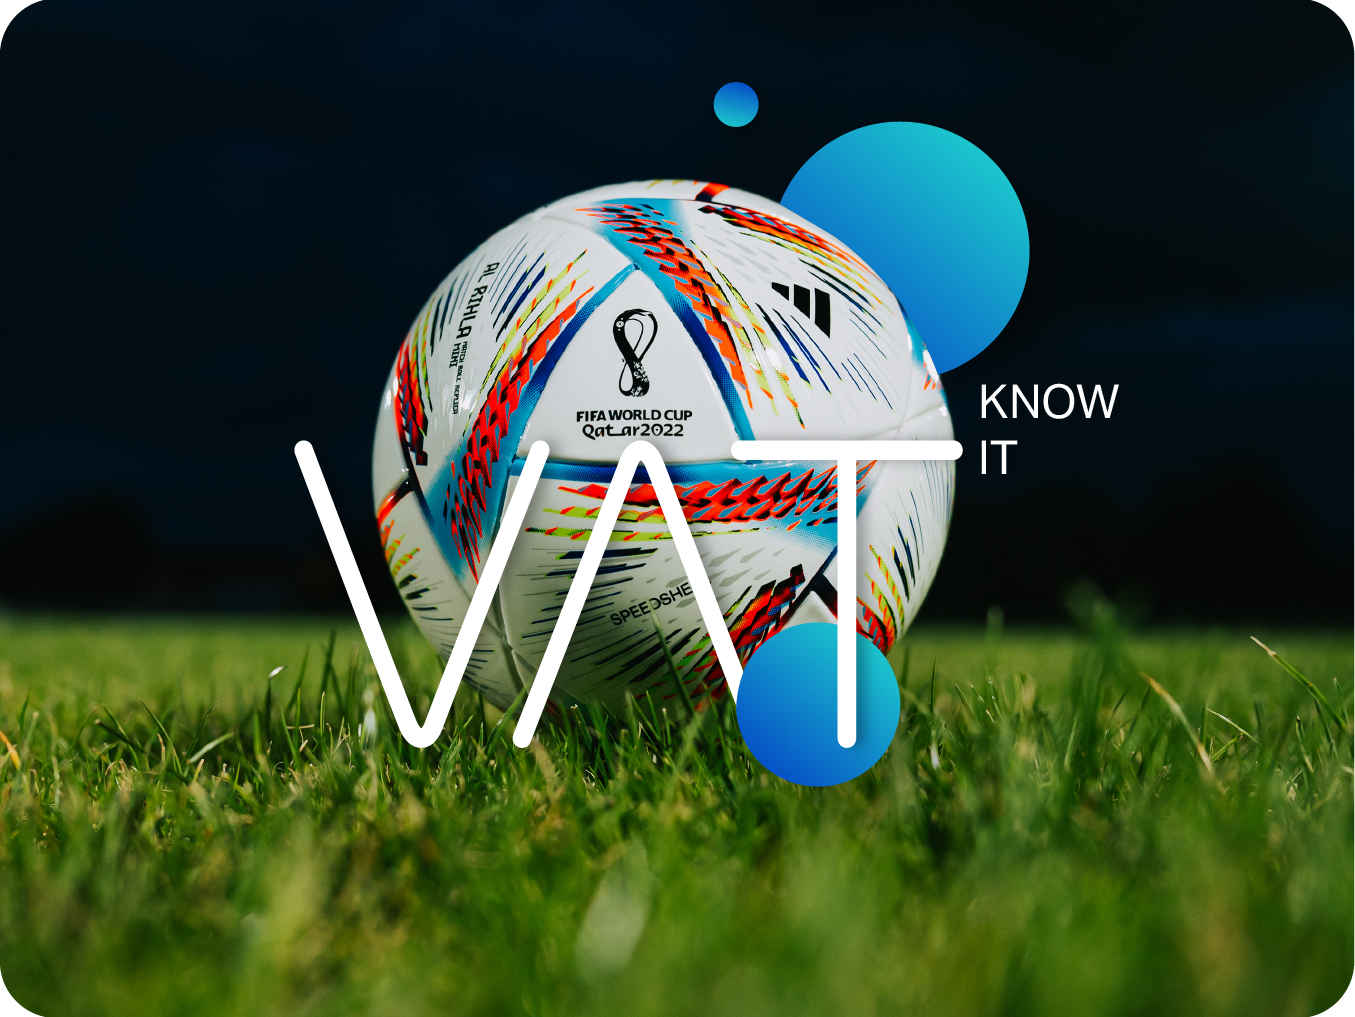 No VAT Return for Businesses Attending the Fifa World Cup